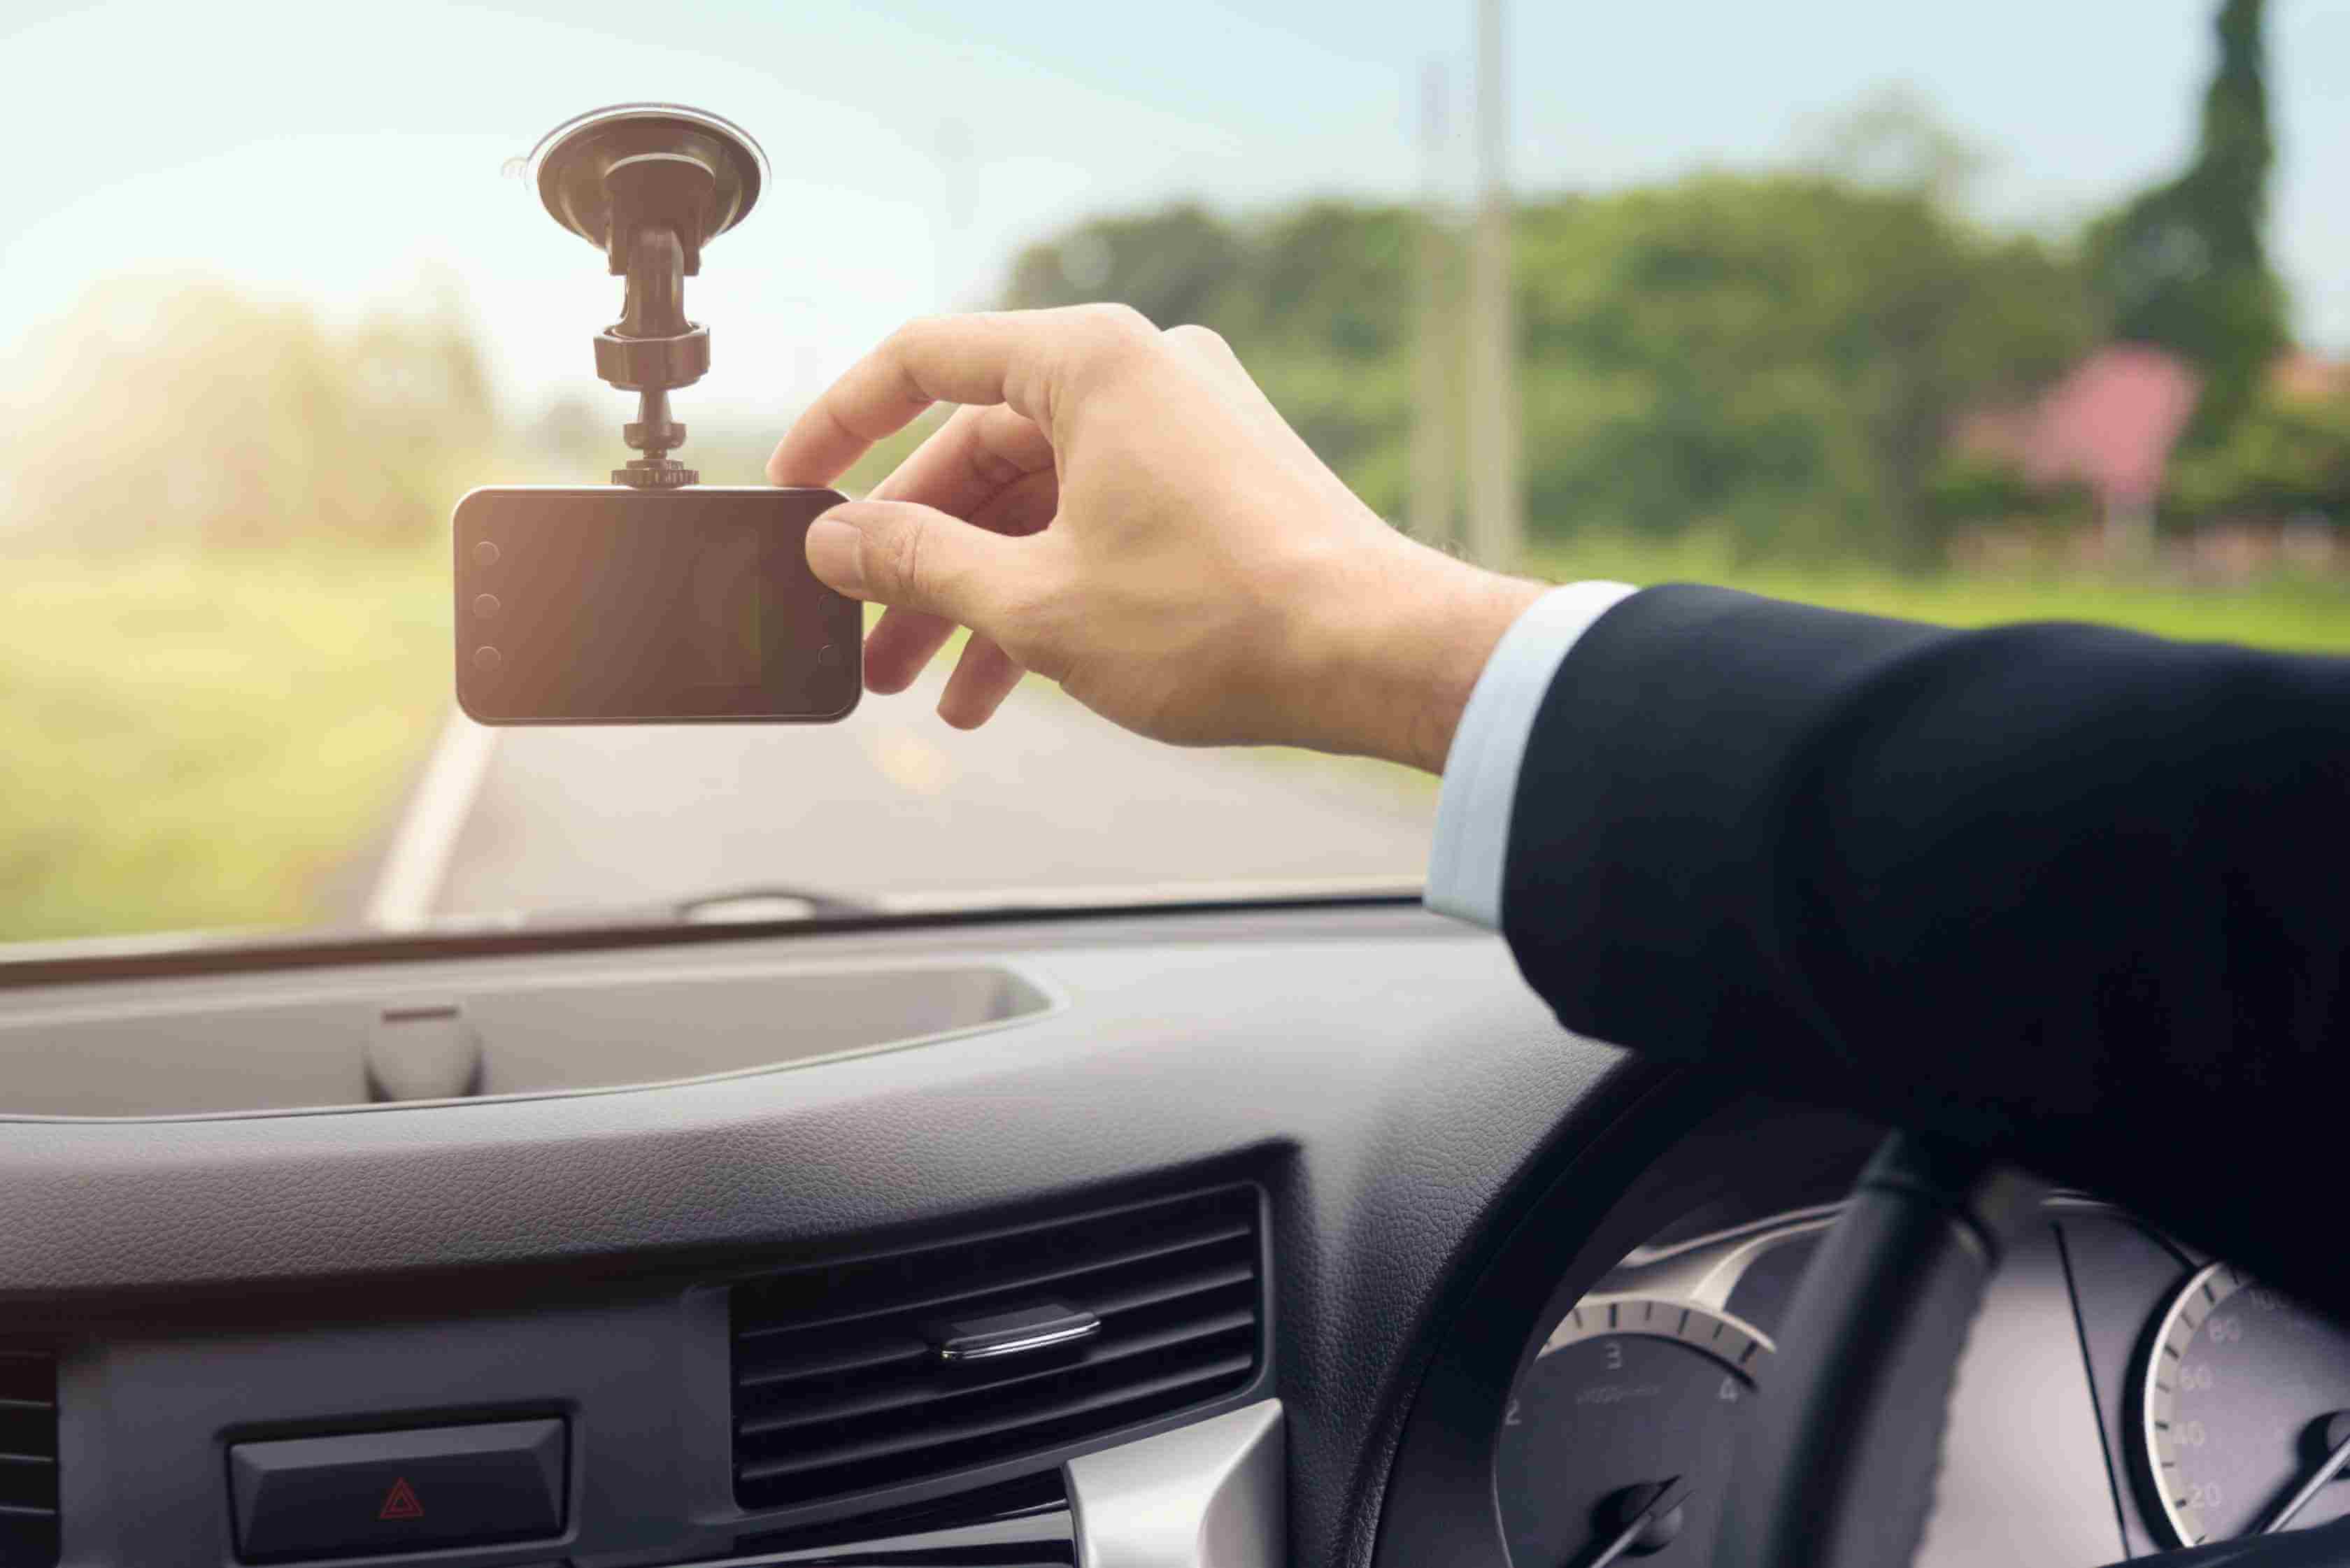 https://www.allianz-assistance.co.uk/help-and-advice/automotive-news-and-advice-hub/What-are-the-key-benefits-of-a-dash-cam/_jcr_content/root/parsys/stage/stageimage.img.82.3360.jpeg/1696496221596/what-are-the-key-benefits-of-a-dash-cam-image.jpeg